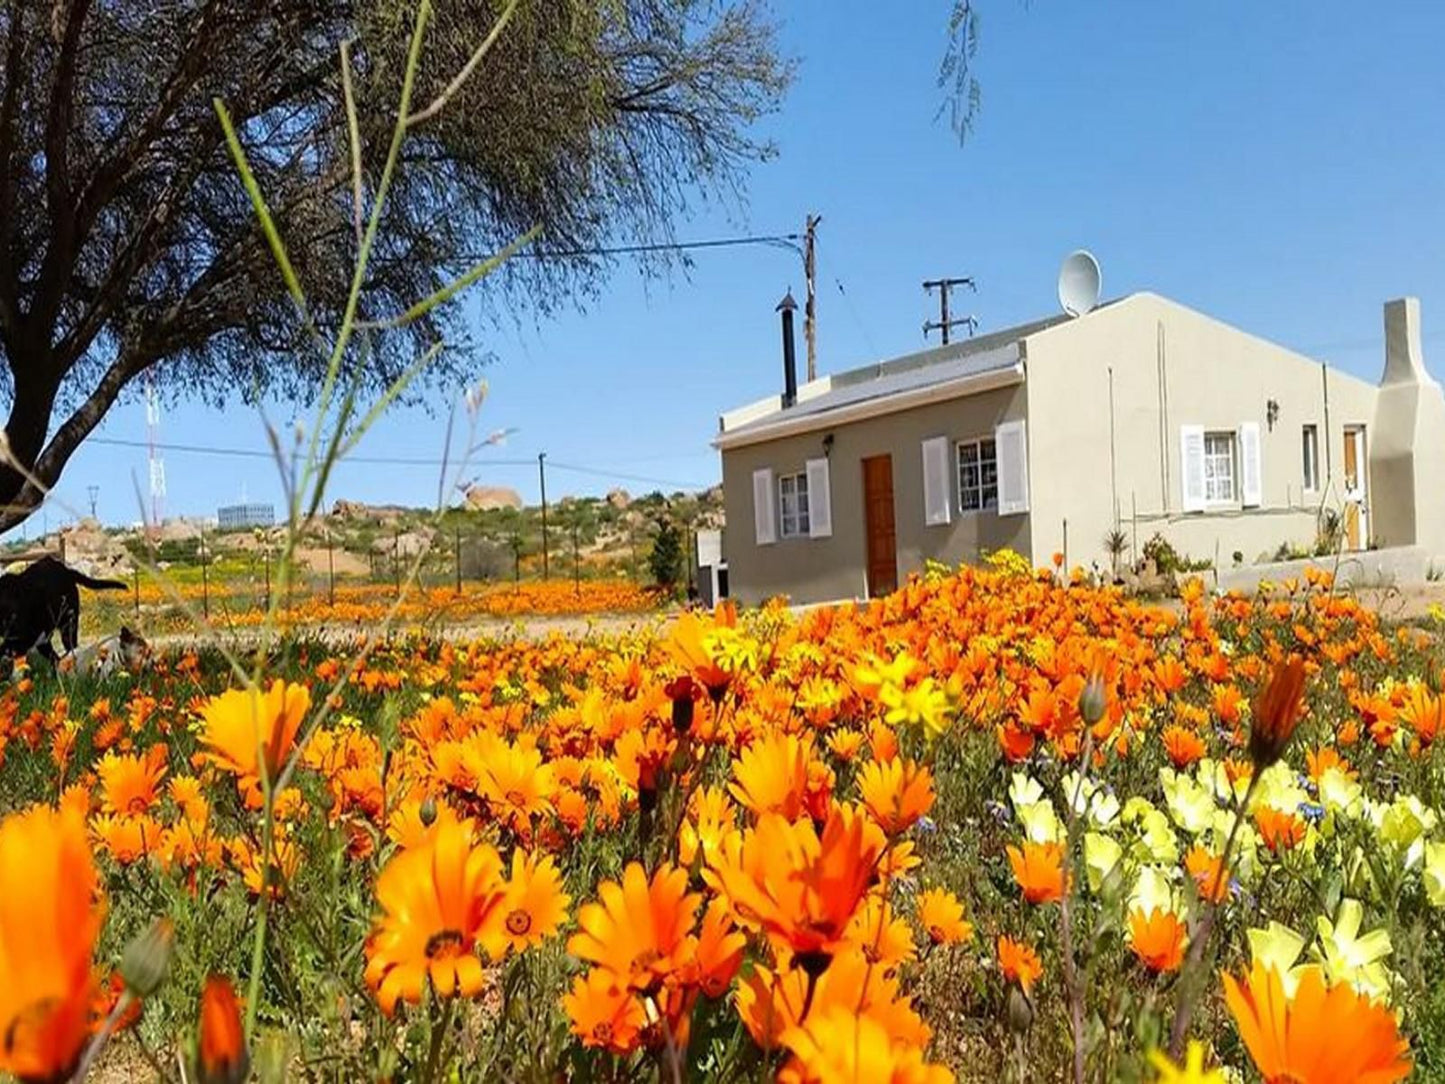 Kamieskroon Cosy Cottages Kamieskroon Northern Cape South Africa Complementary Colors, Plant, Nature